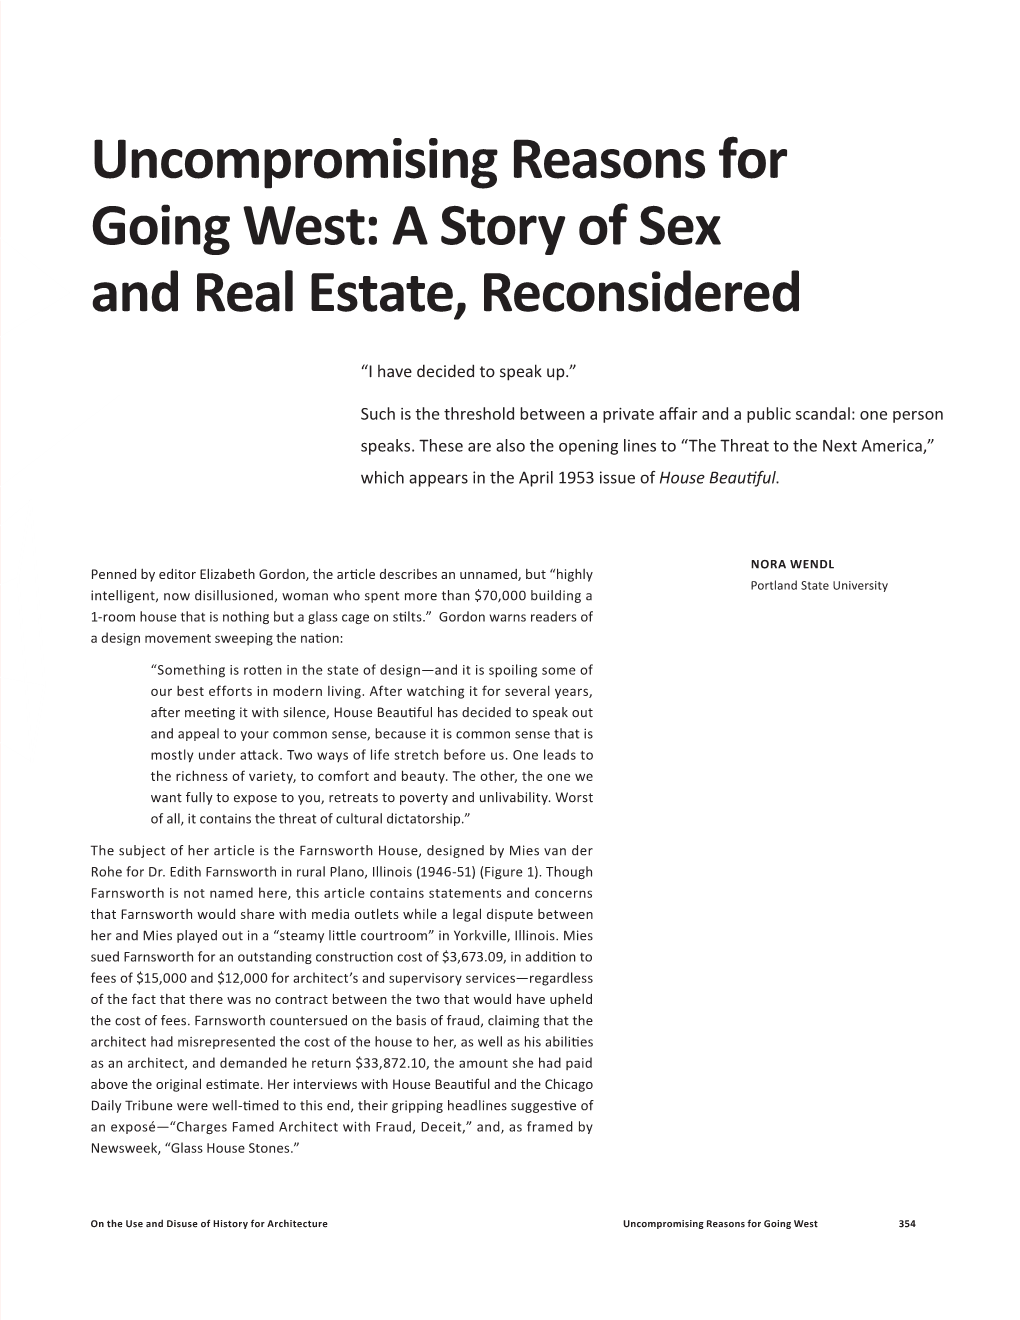 Uncompromising Reasons for Going West: a Story of Sex and Real Estate, Reconsidered